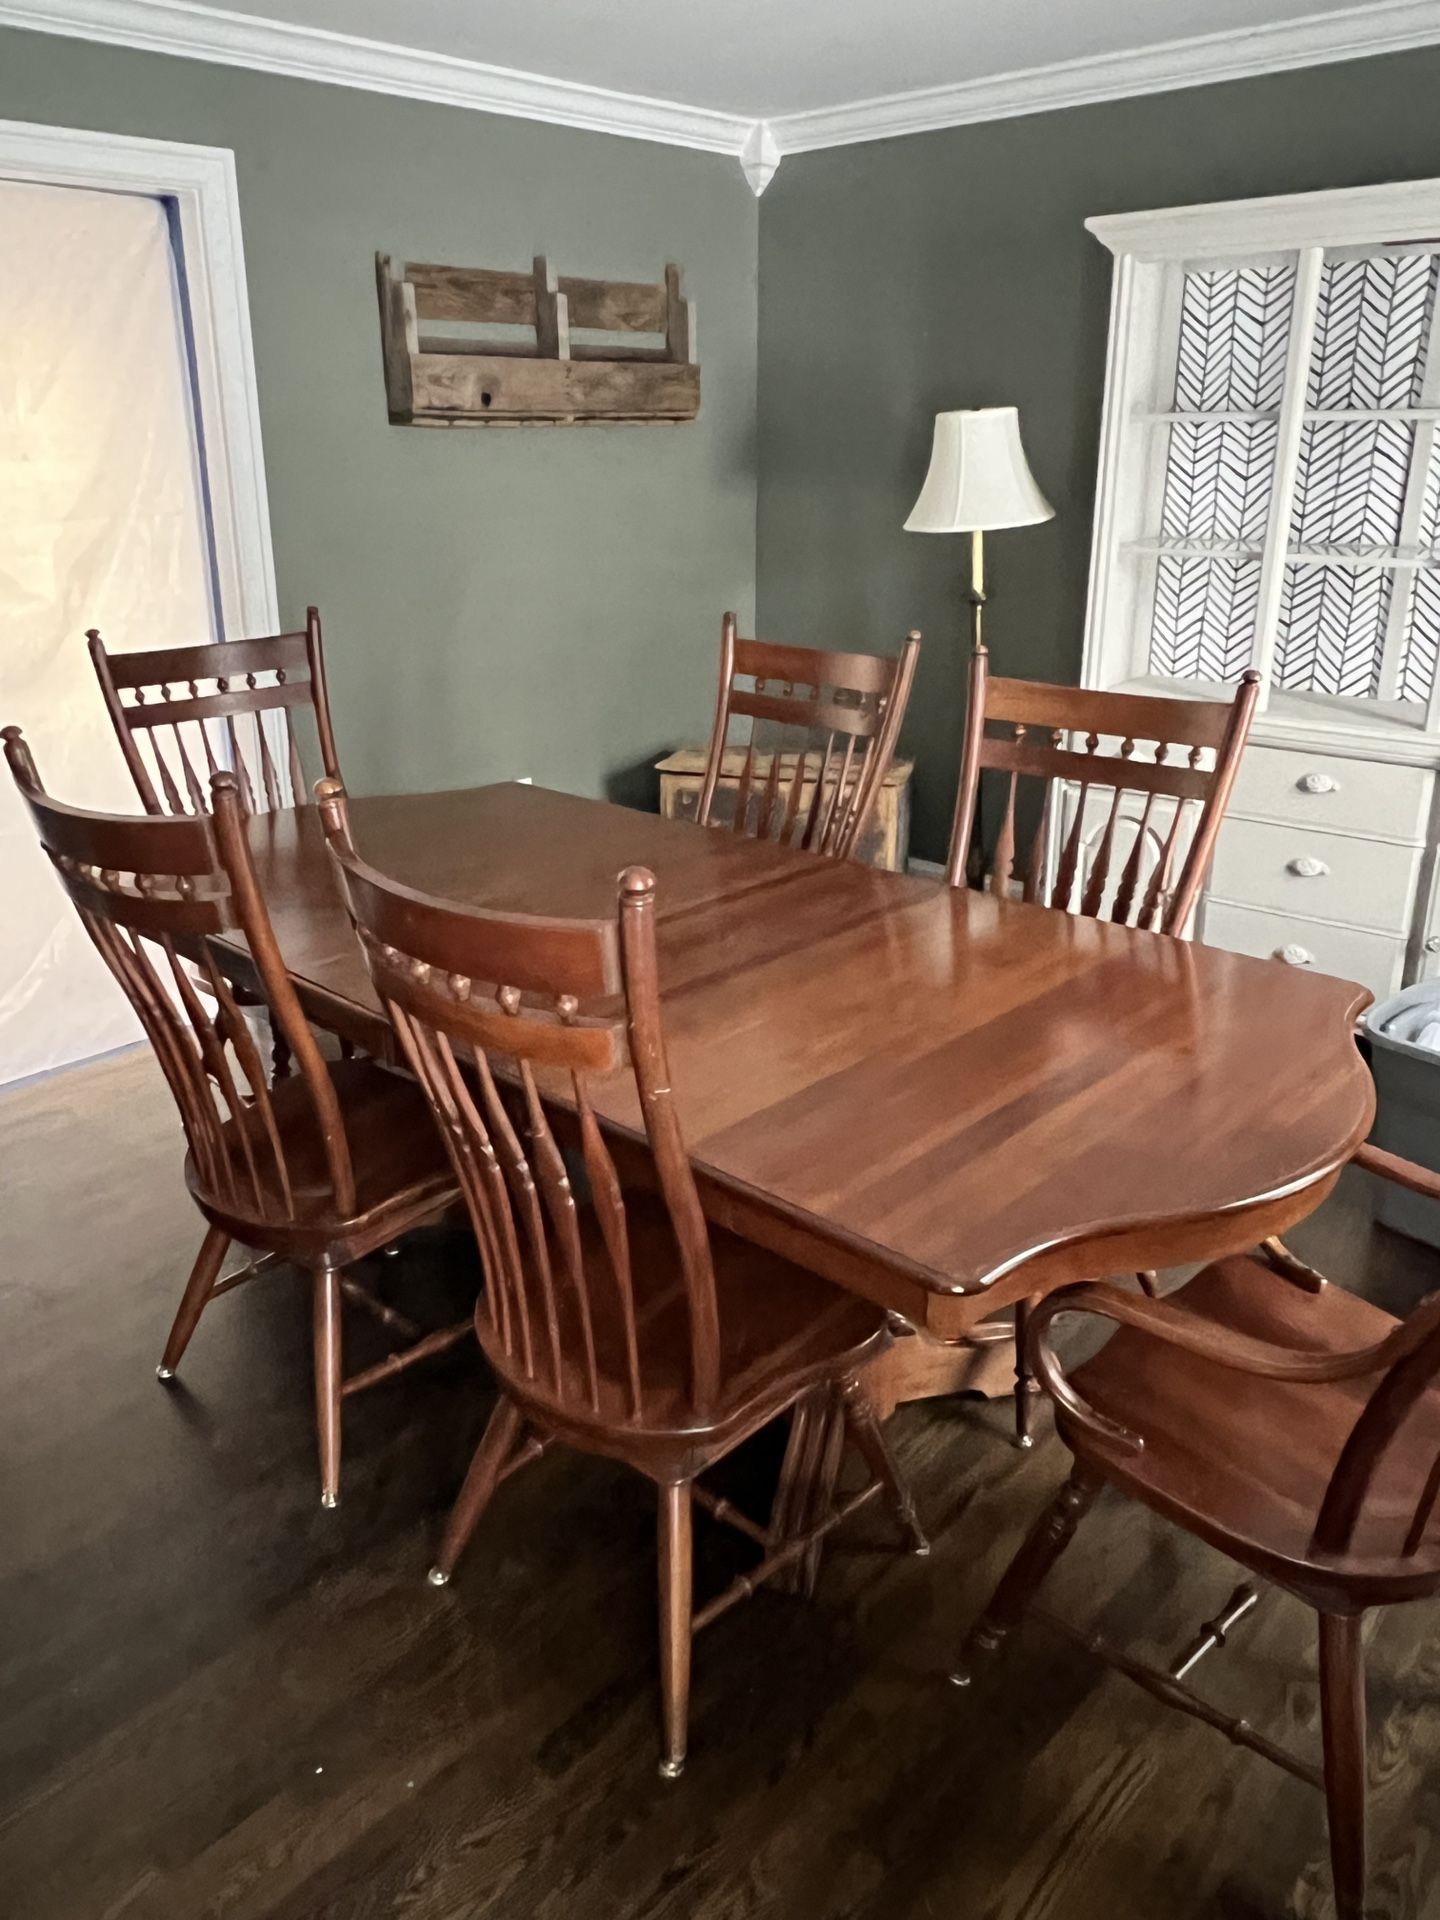 Gorgeous one of a kind dining room table